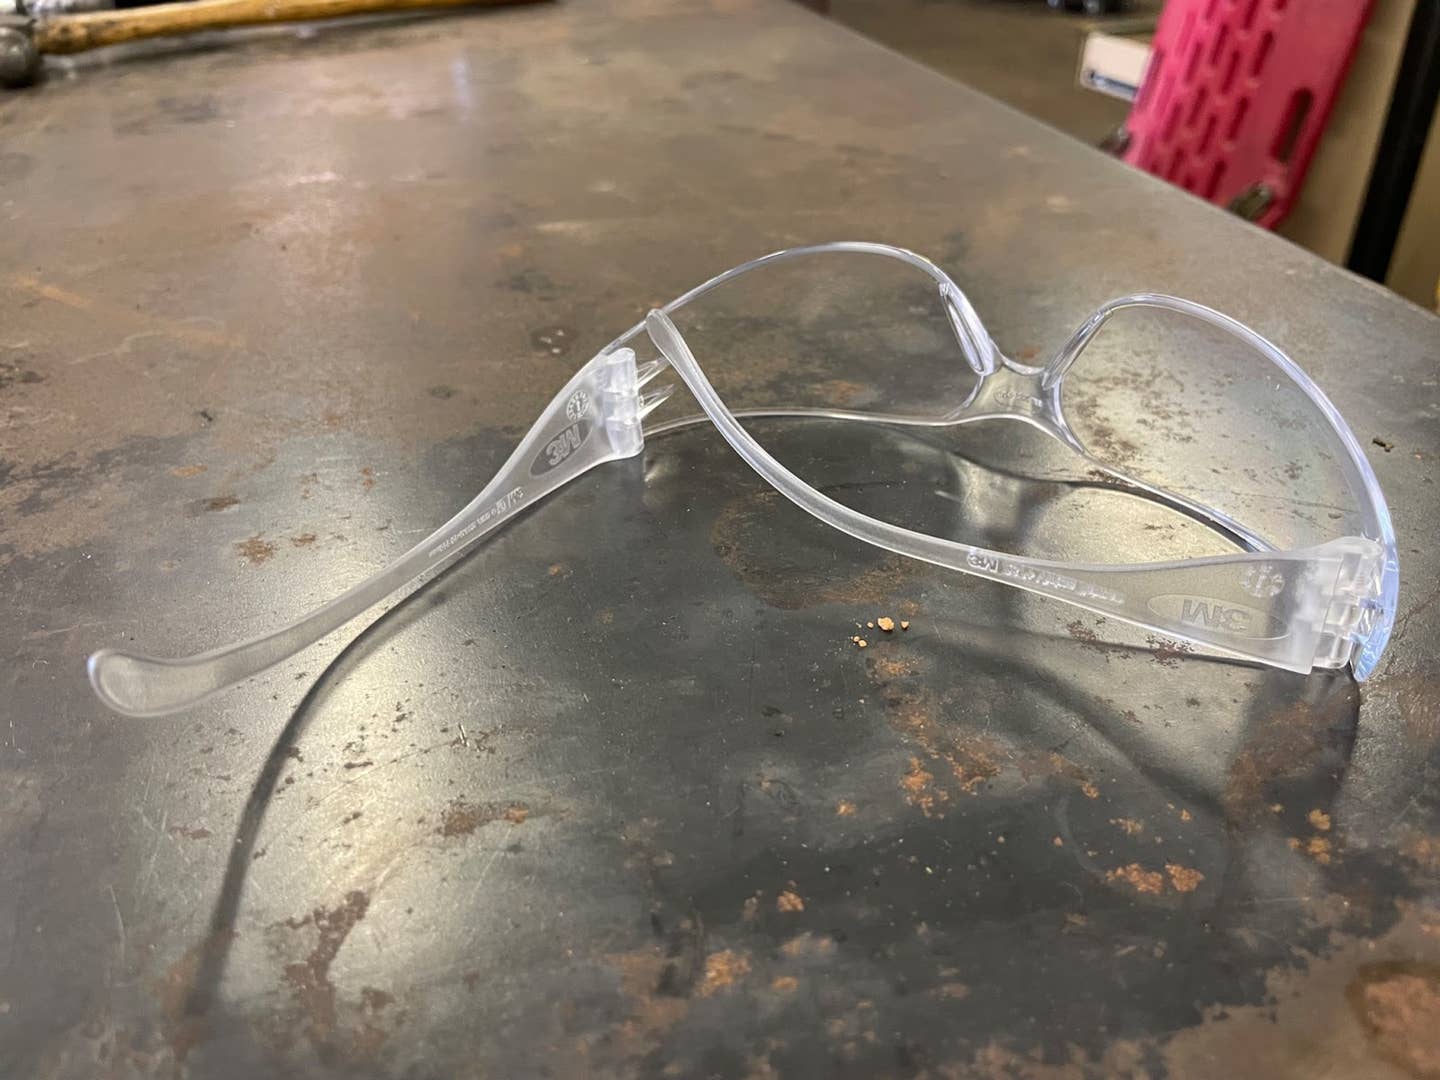 Are 3M Virtua AP Protective Safety Glasses effective or not?